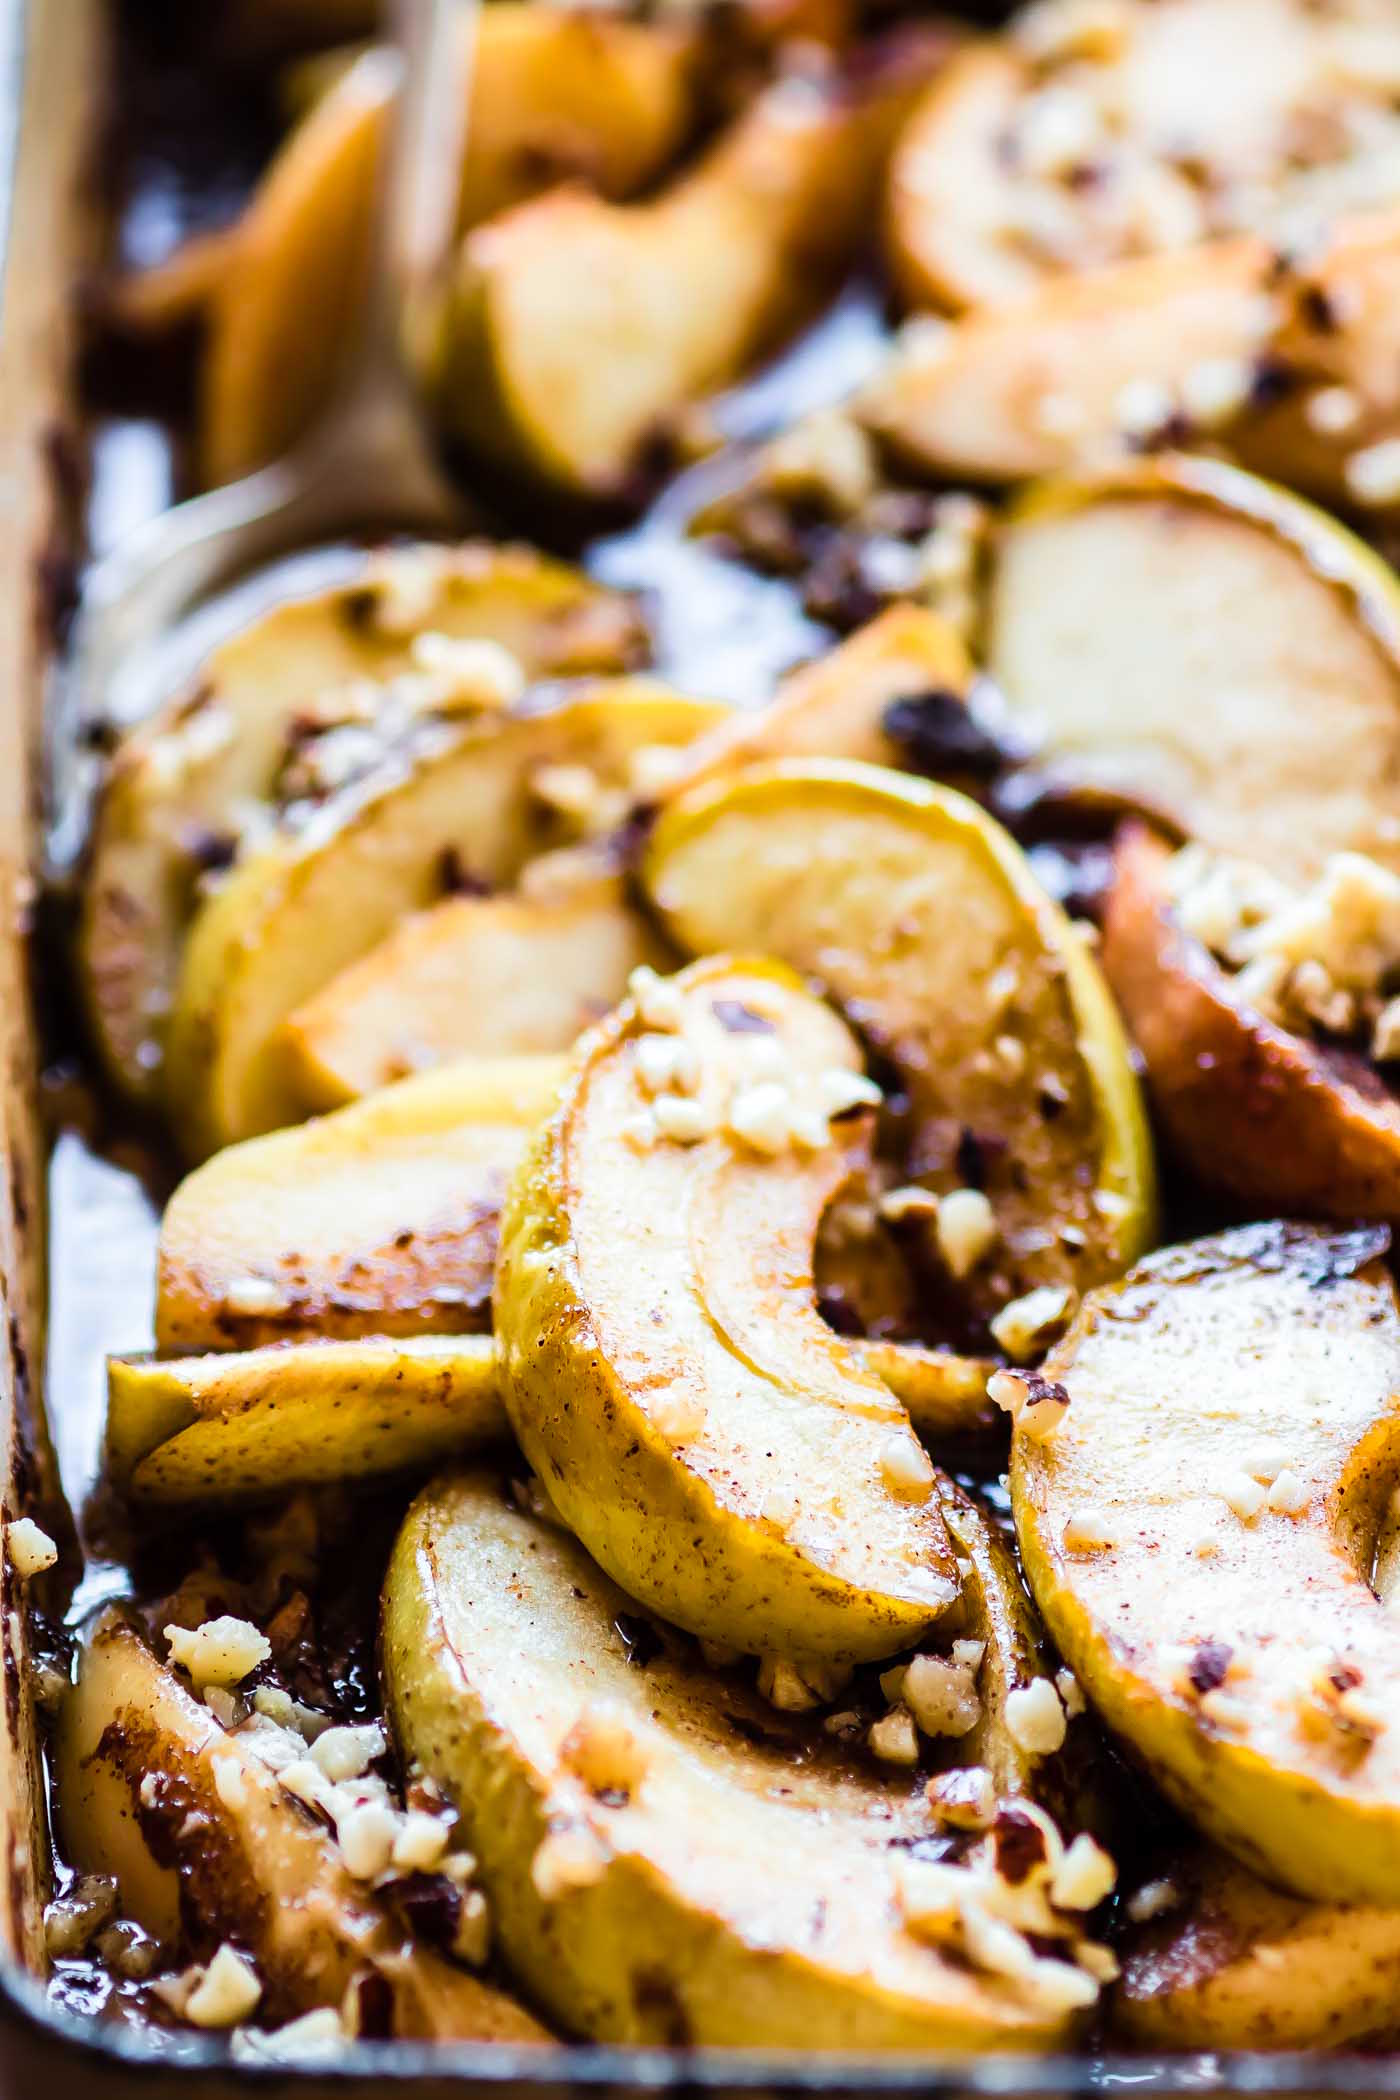 pan of baked apple slices in caramel syrup